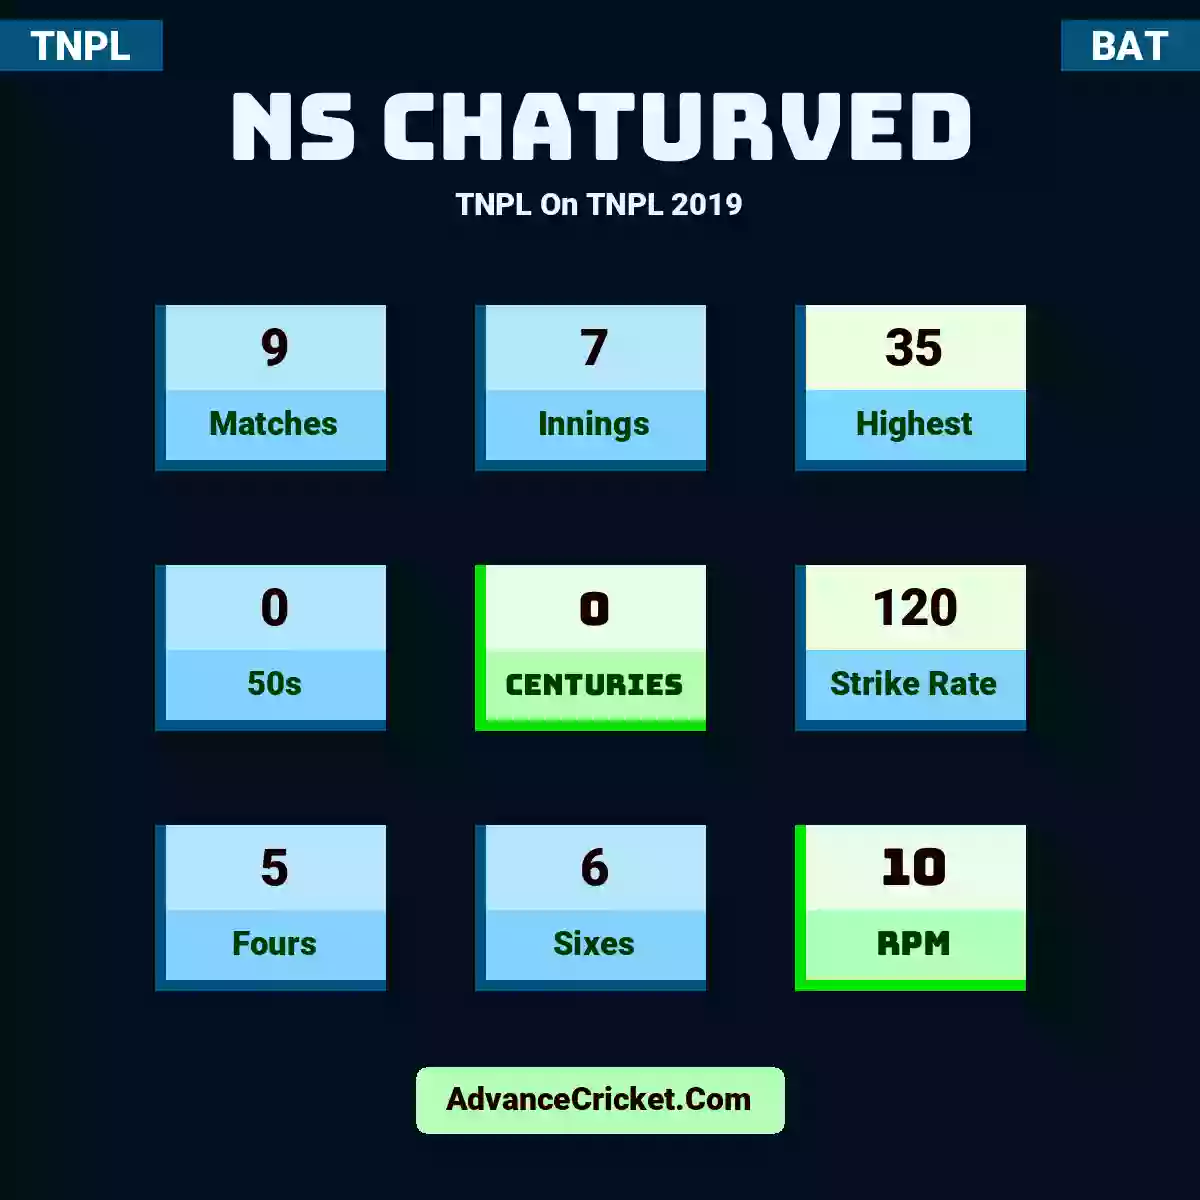 NS Chaturved TNPL  On TNPL 2019, NS Chaturved played 9 matches, scored 35 runs as highest, 0 half-centuries, and 0 centuries, with a strike rate of 120. N.Chaturved hit 5 fours and 6 sixes, with an RPM of 10.